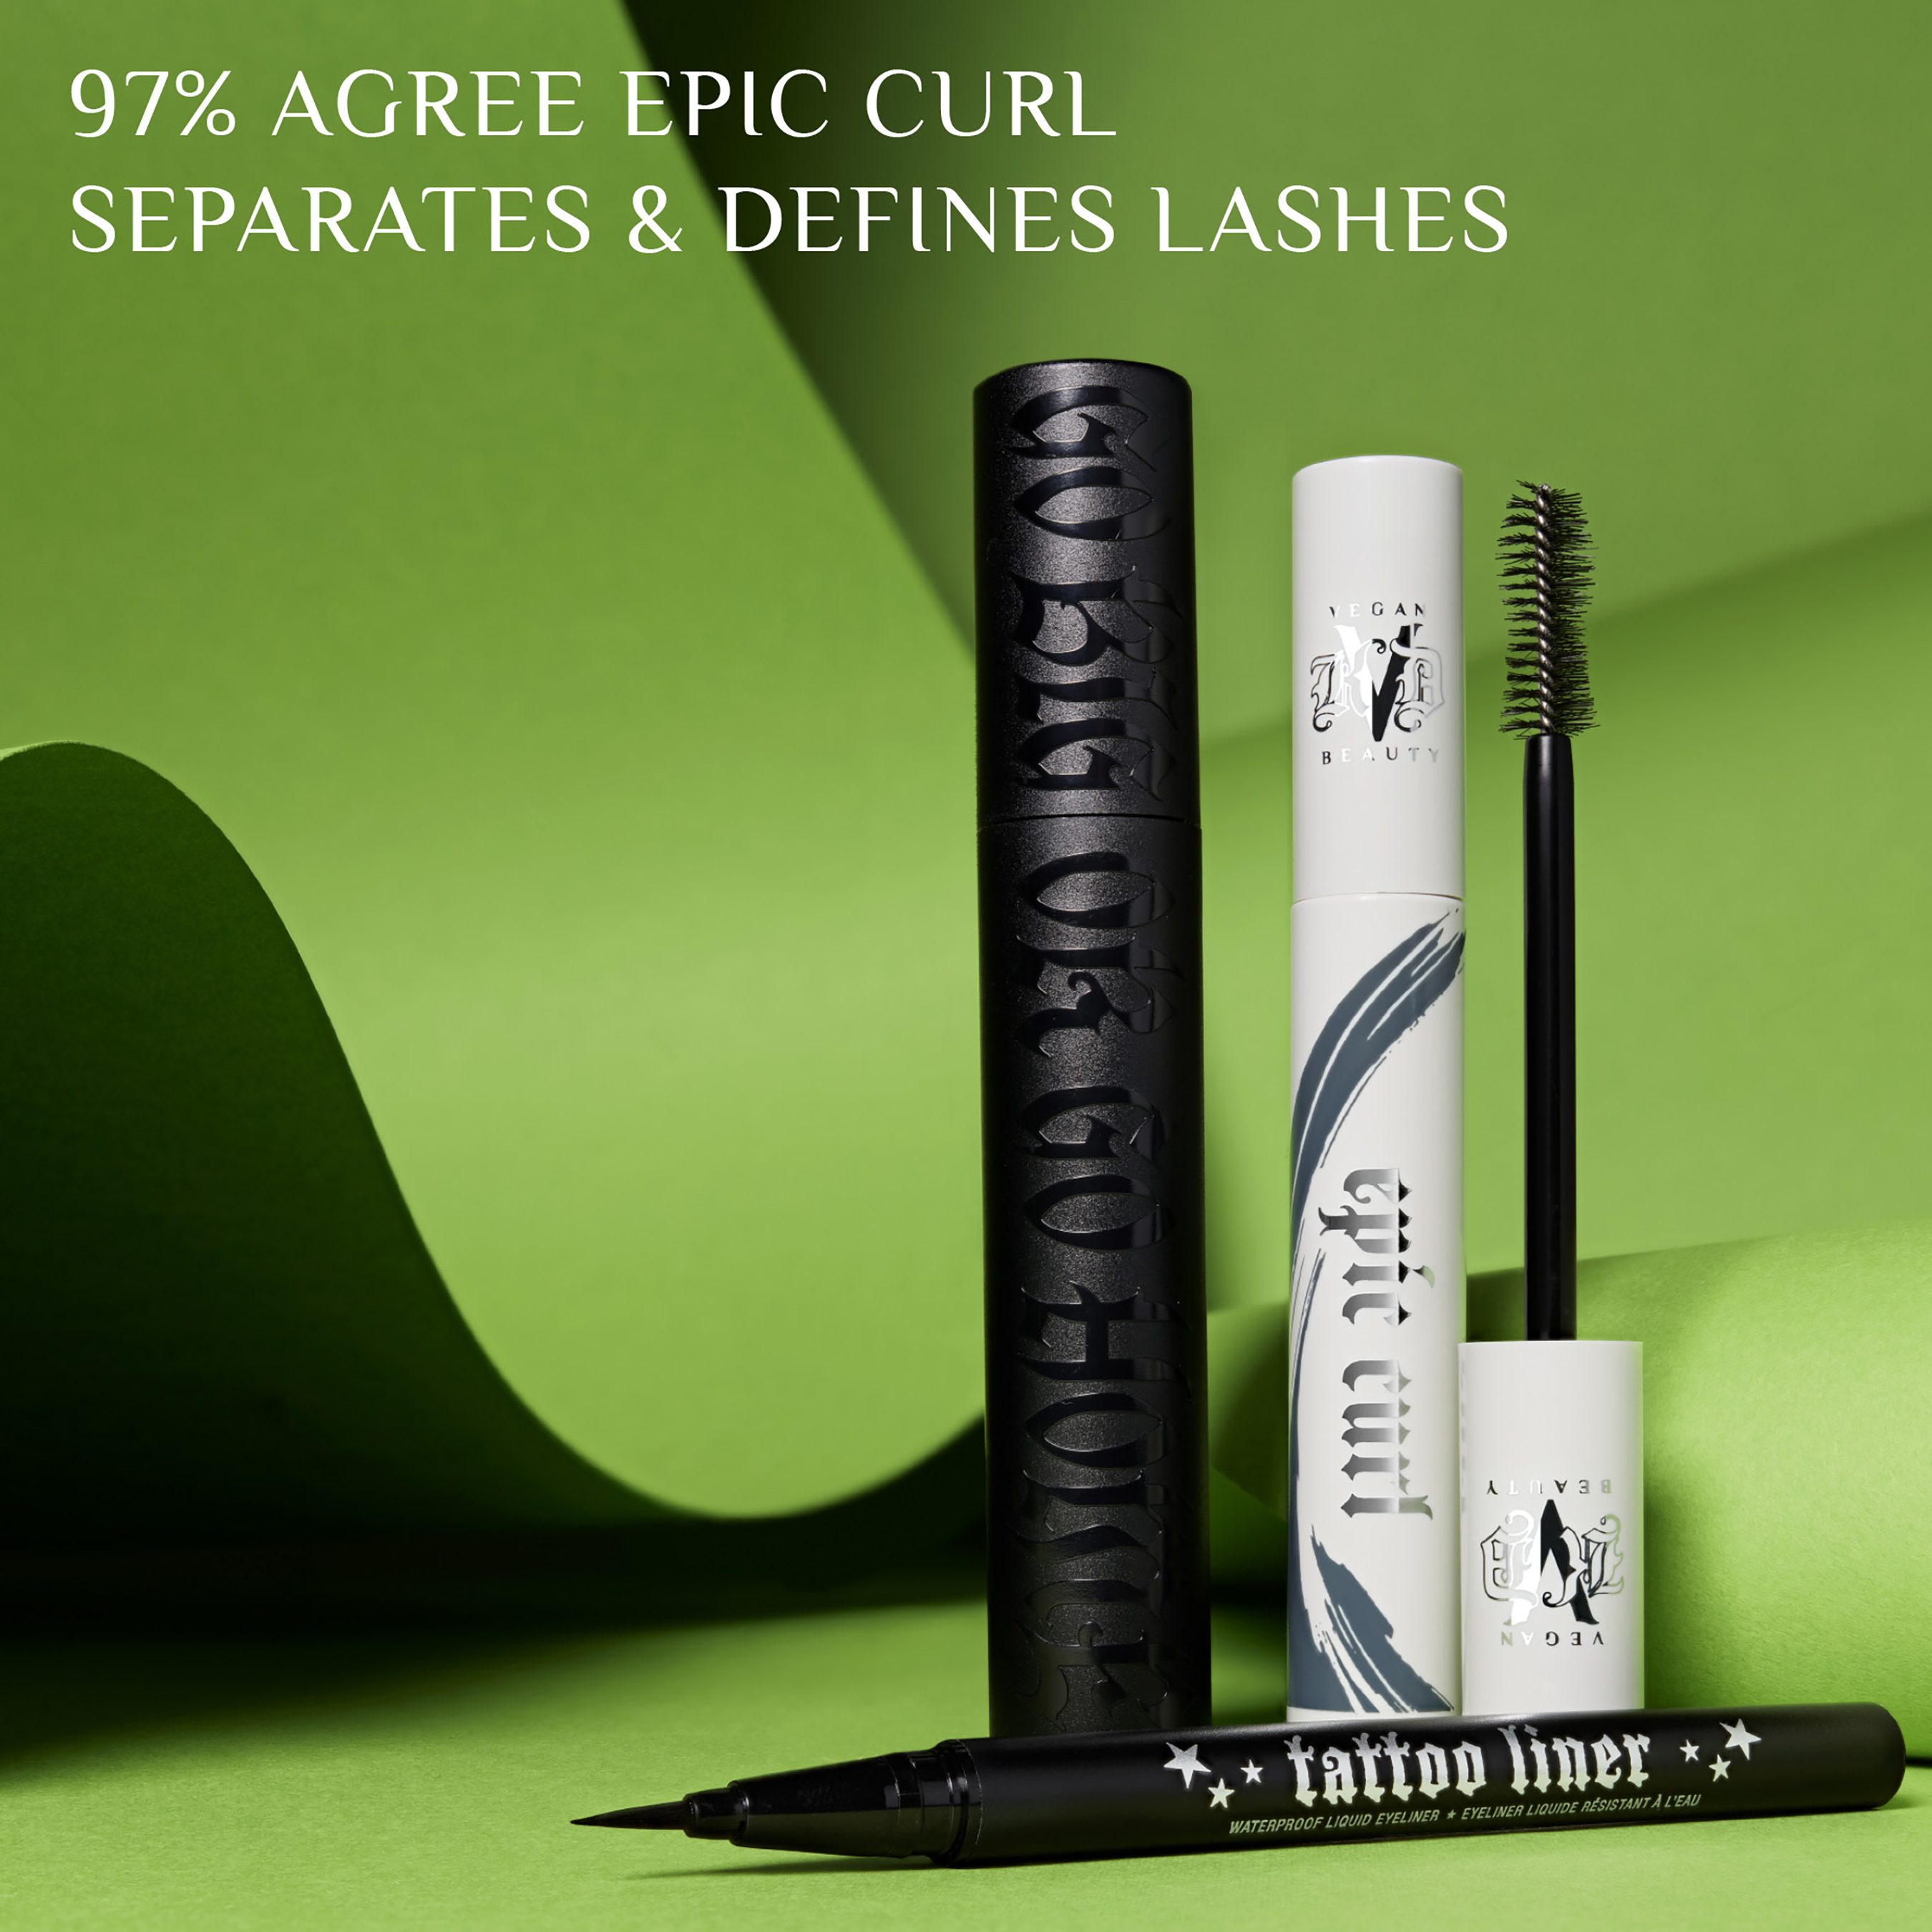 97% of people agree that KVD Vegan Beauty Epic Curl separates and defines lashes